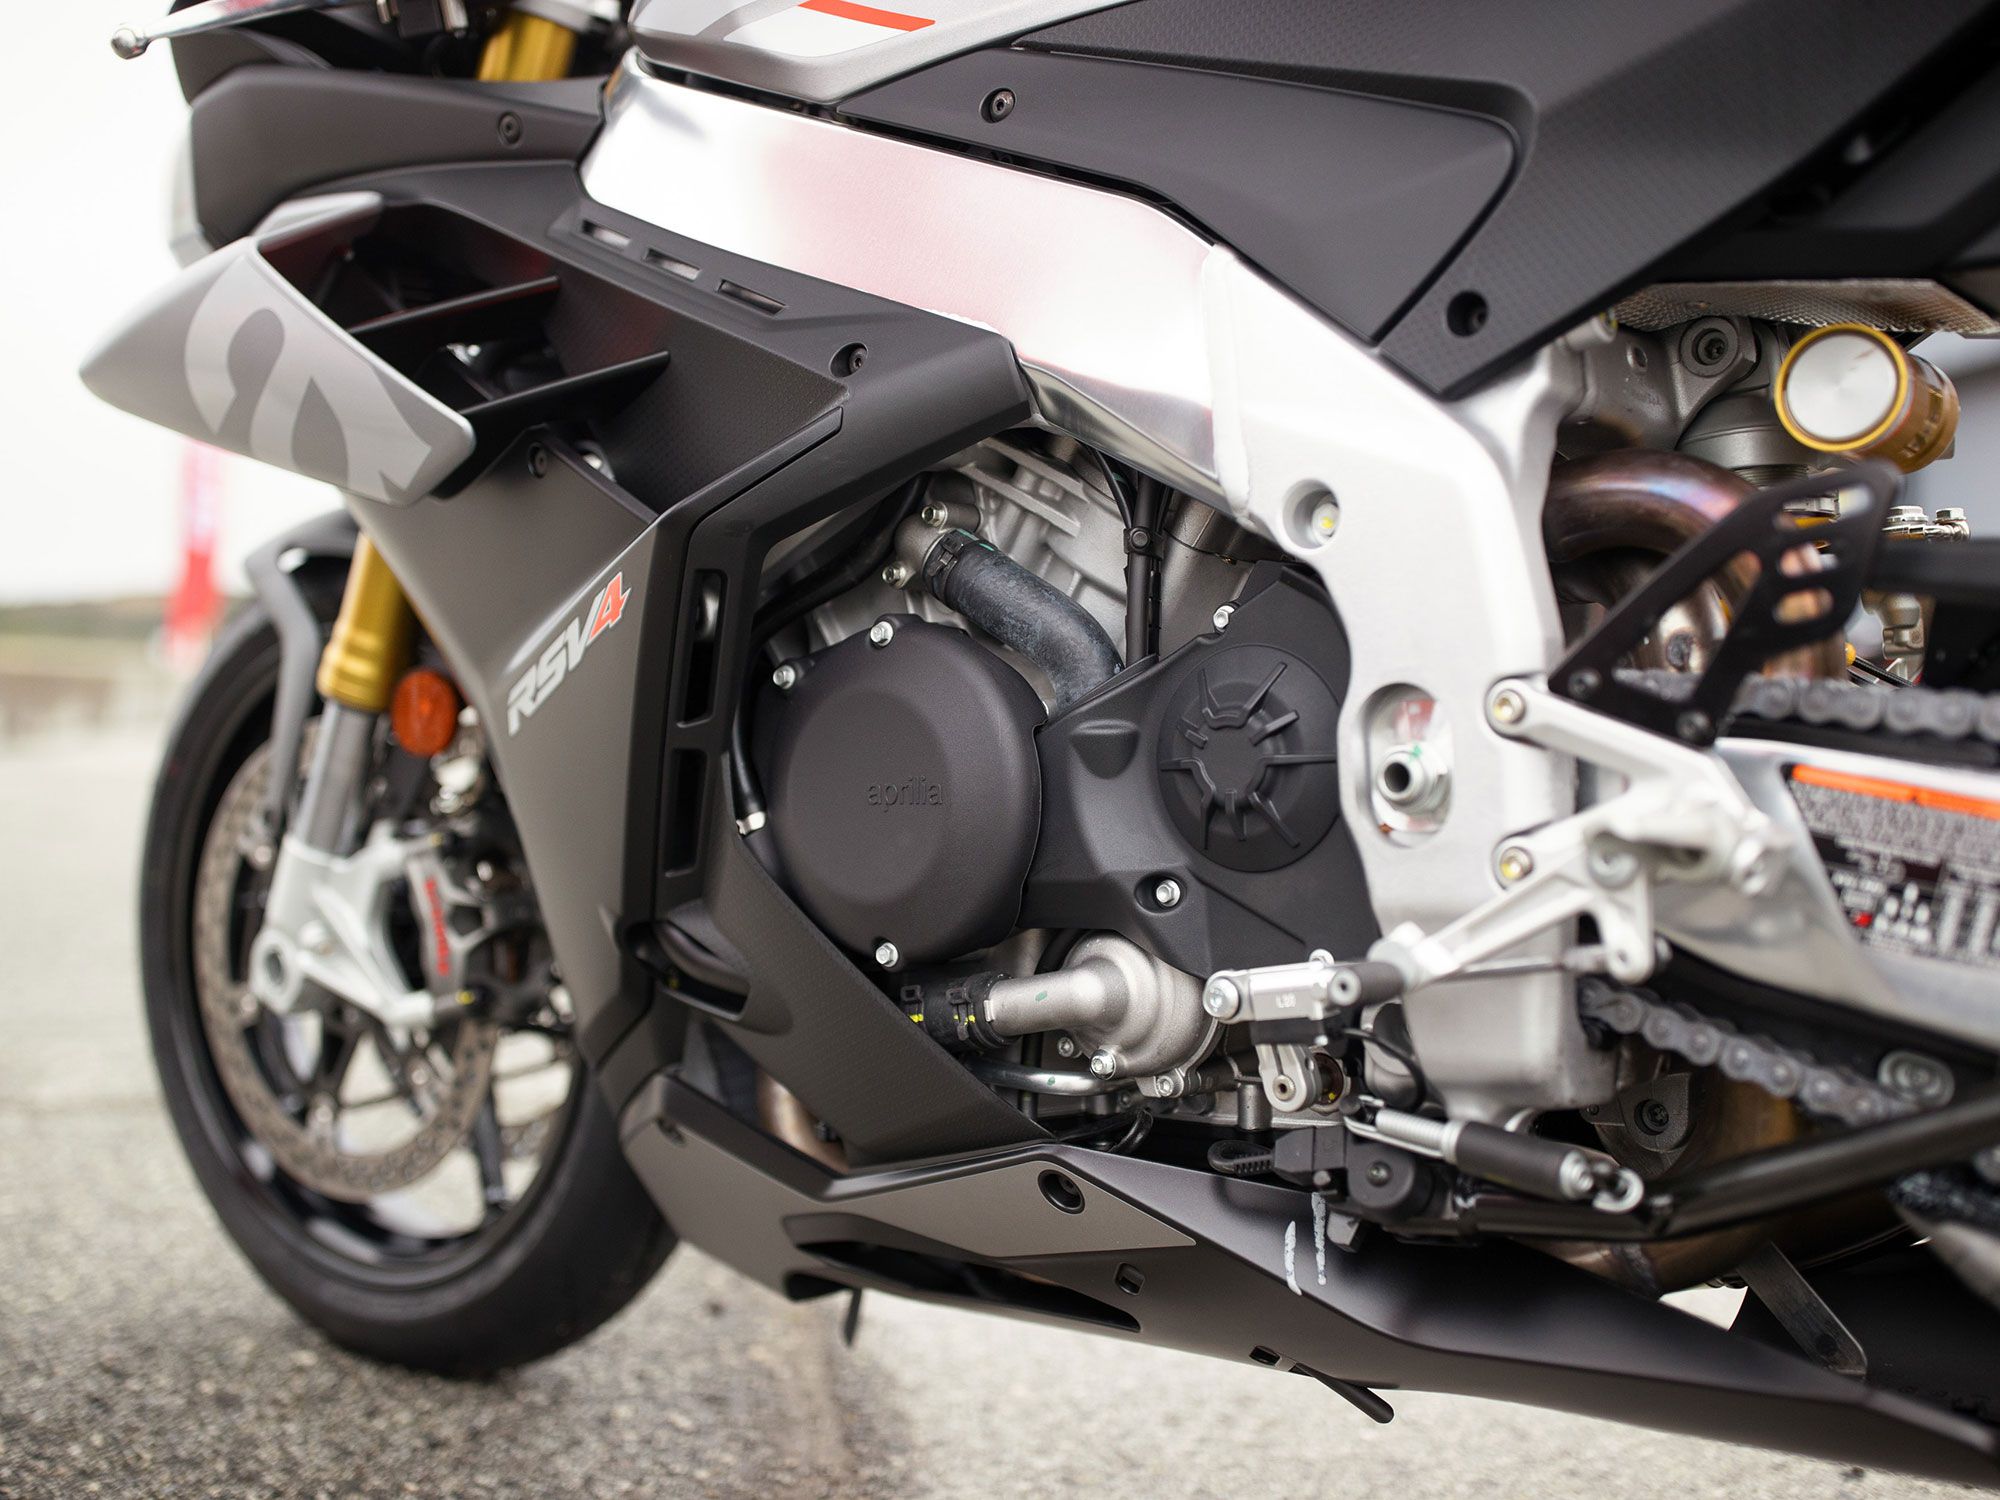 Just when you thought “they can’t make ’em any faster,” Aprilia increases the RSV4’s piston stroke (1mm) which nets an even more broad spread of acceleration torque.